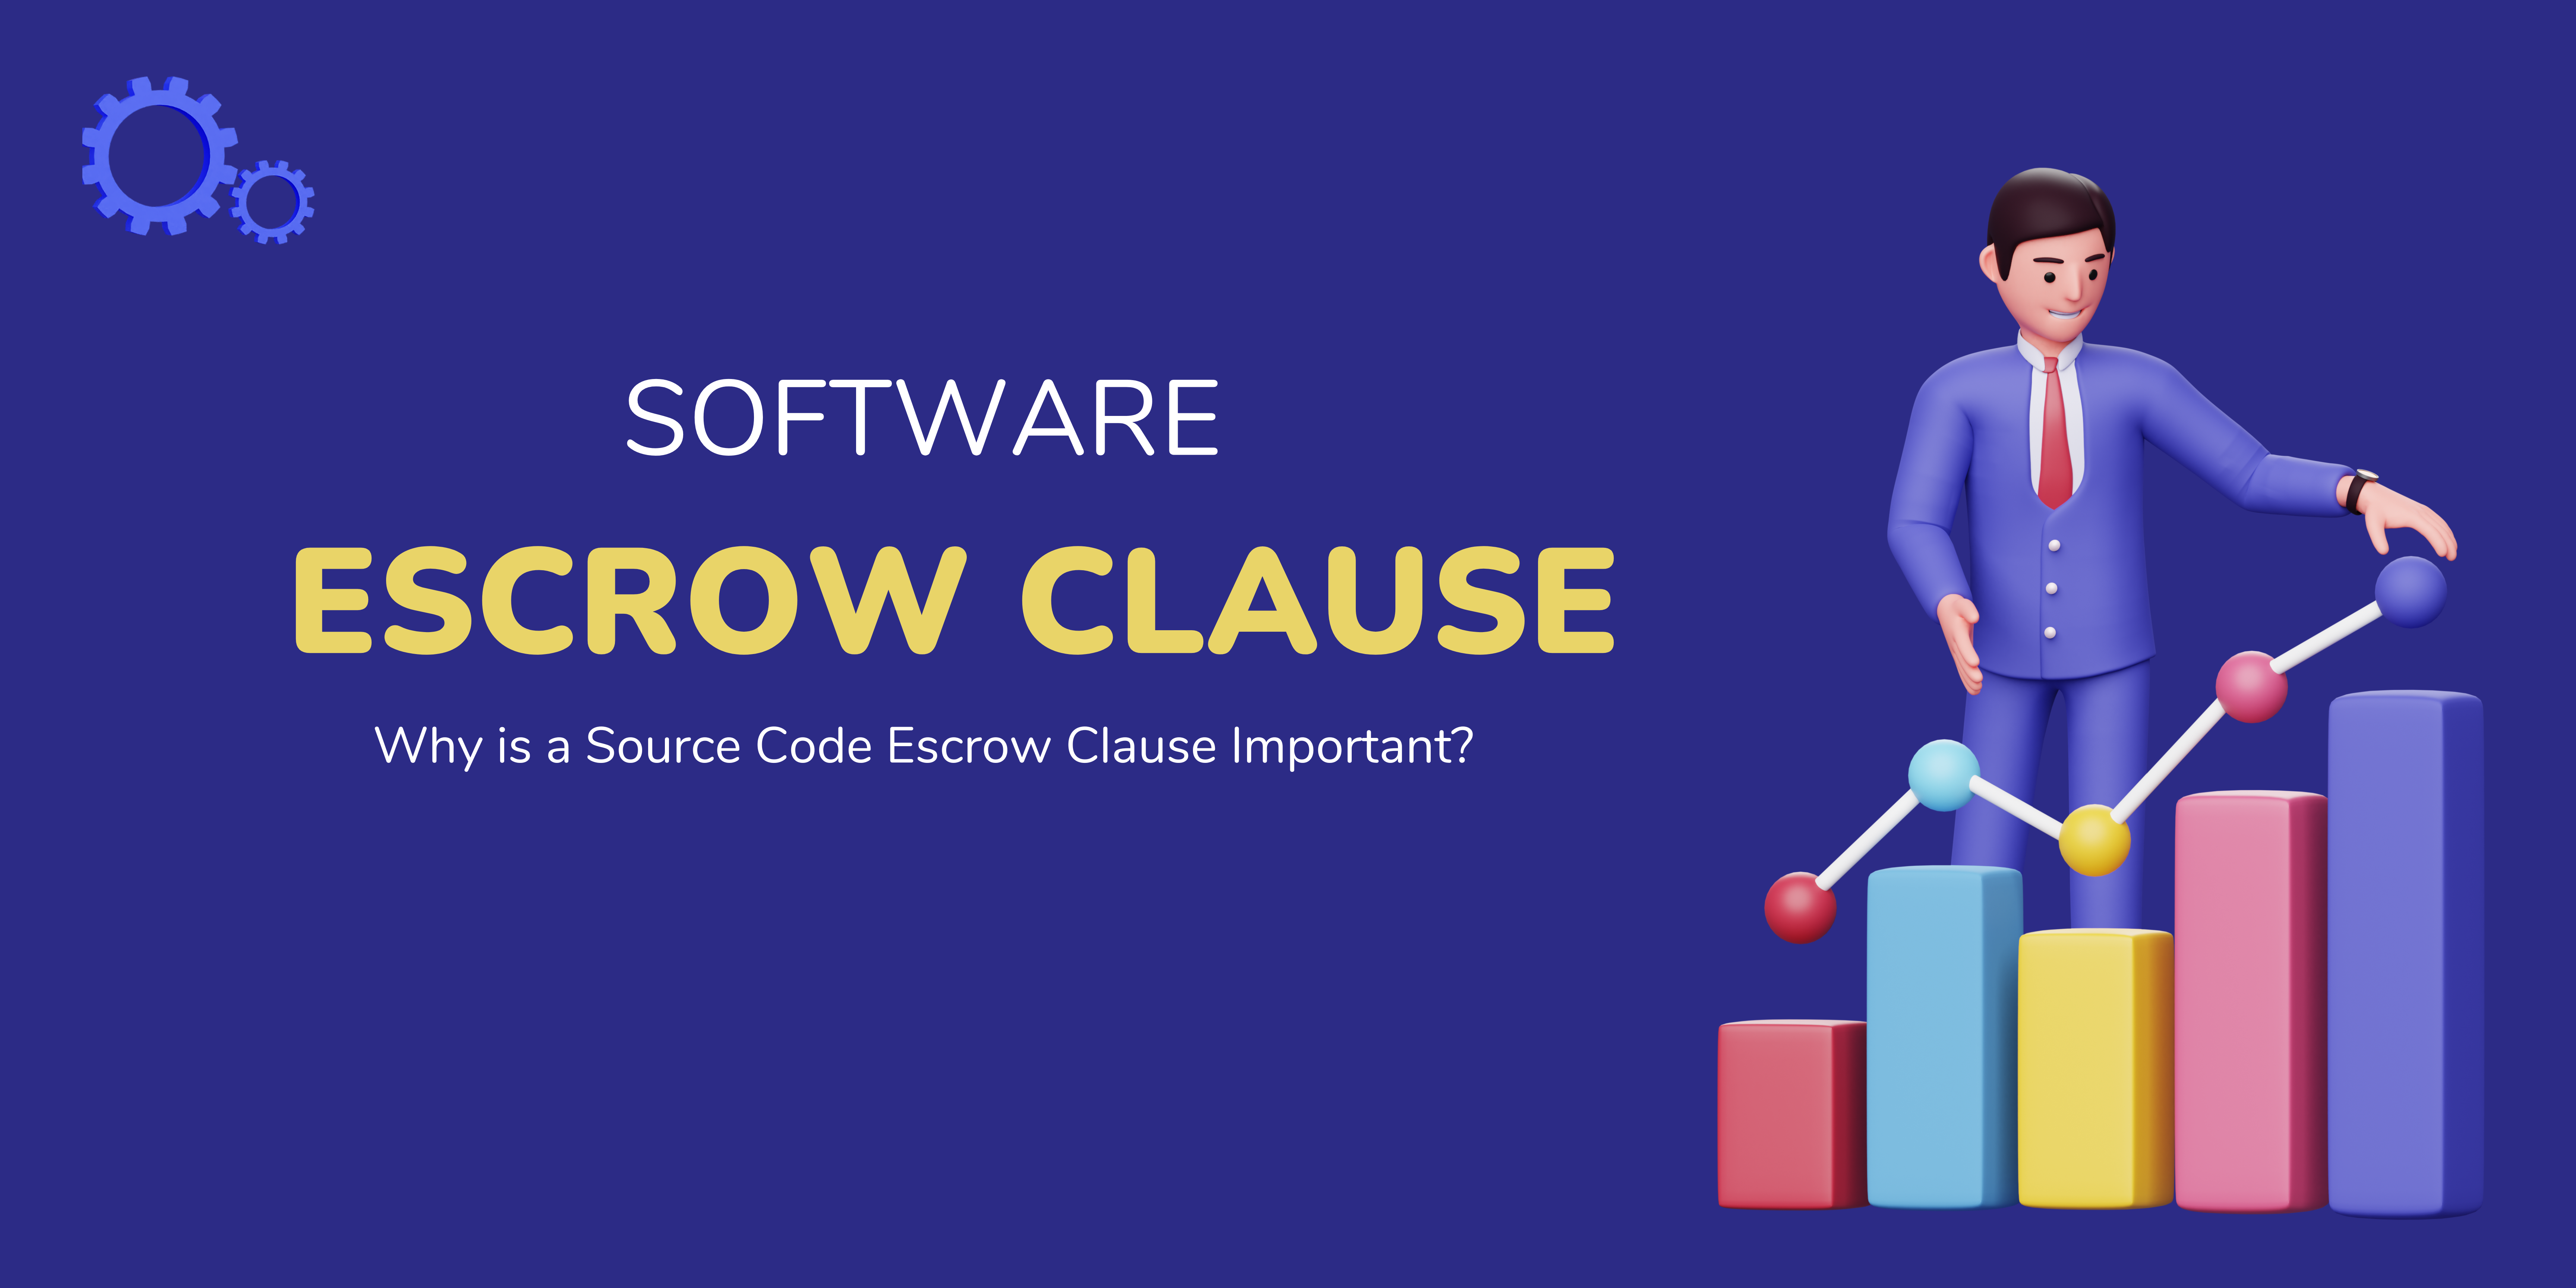 Why is a Source Code Escrow Clause Important?